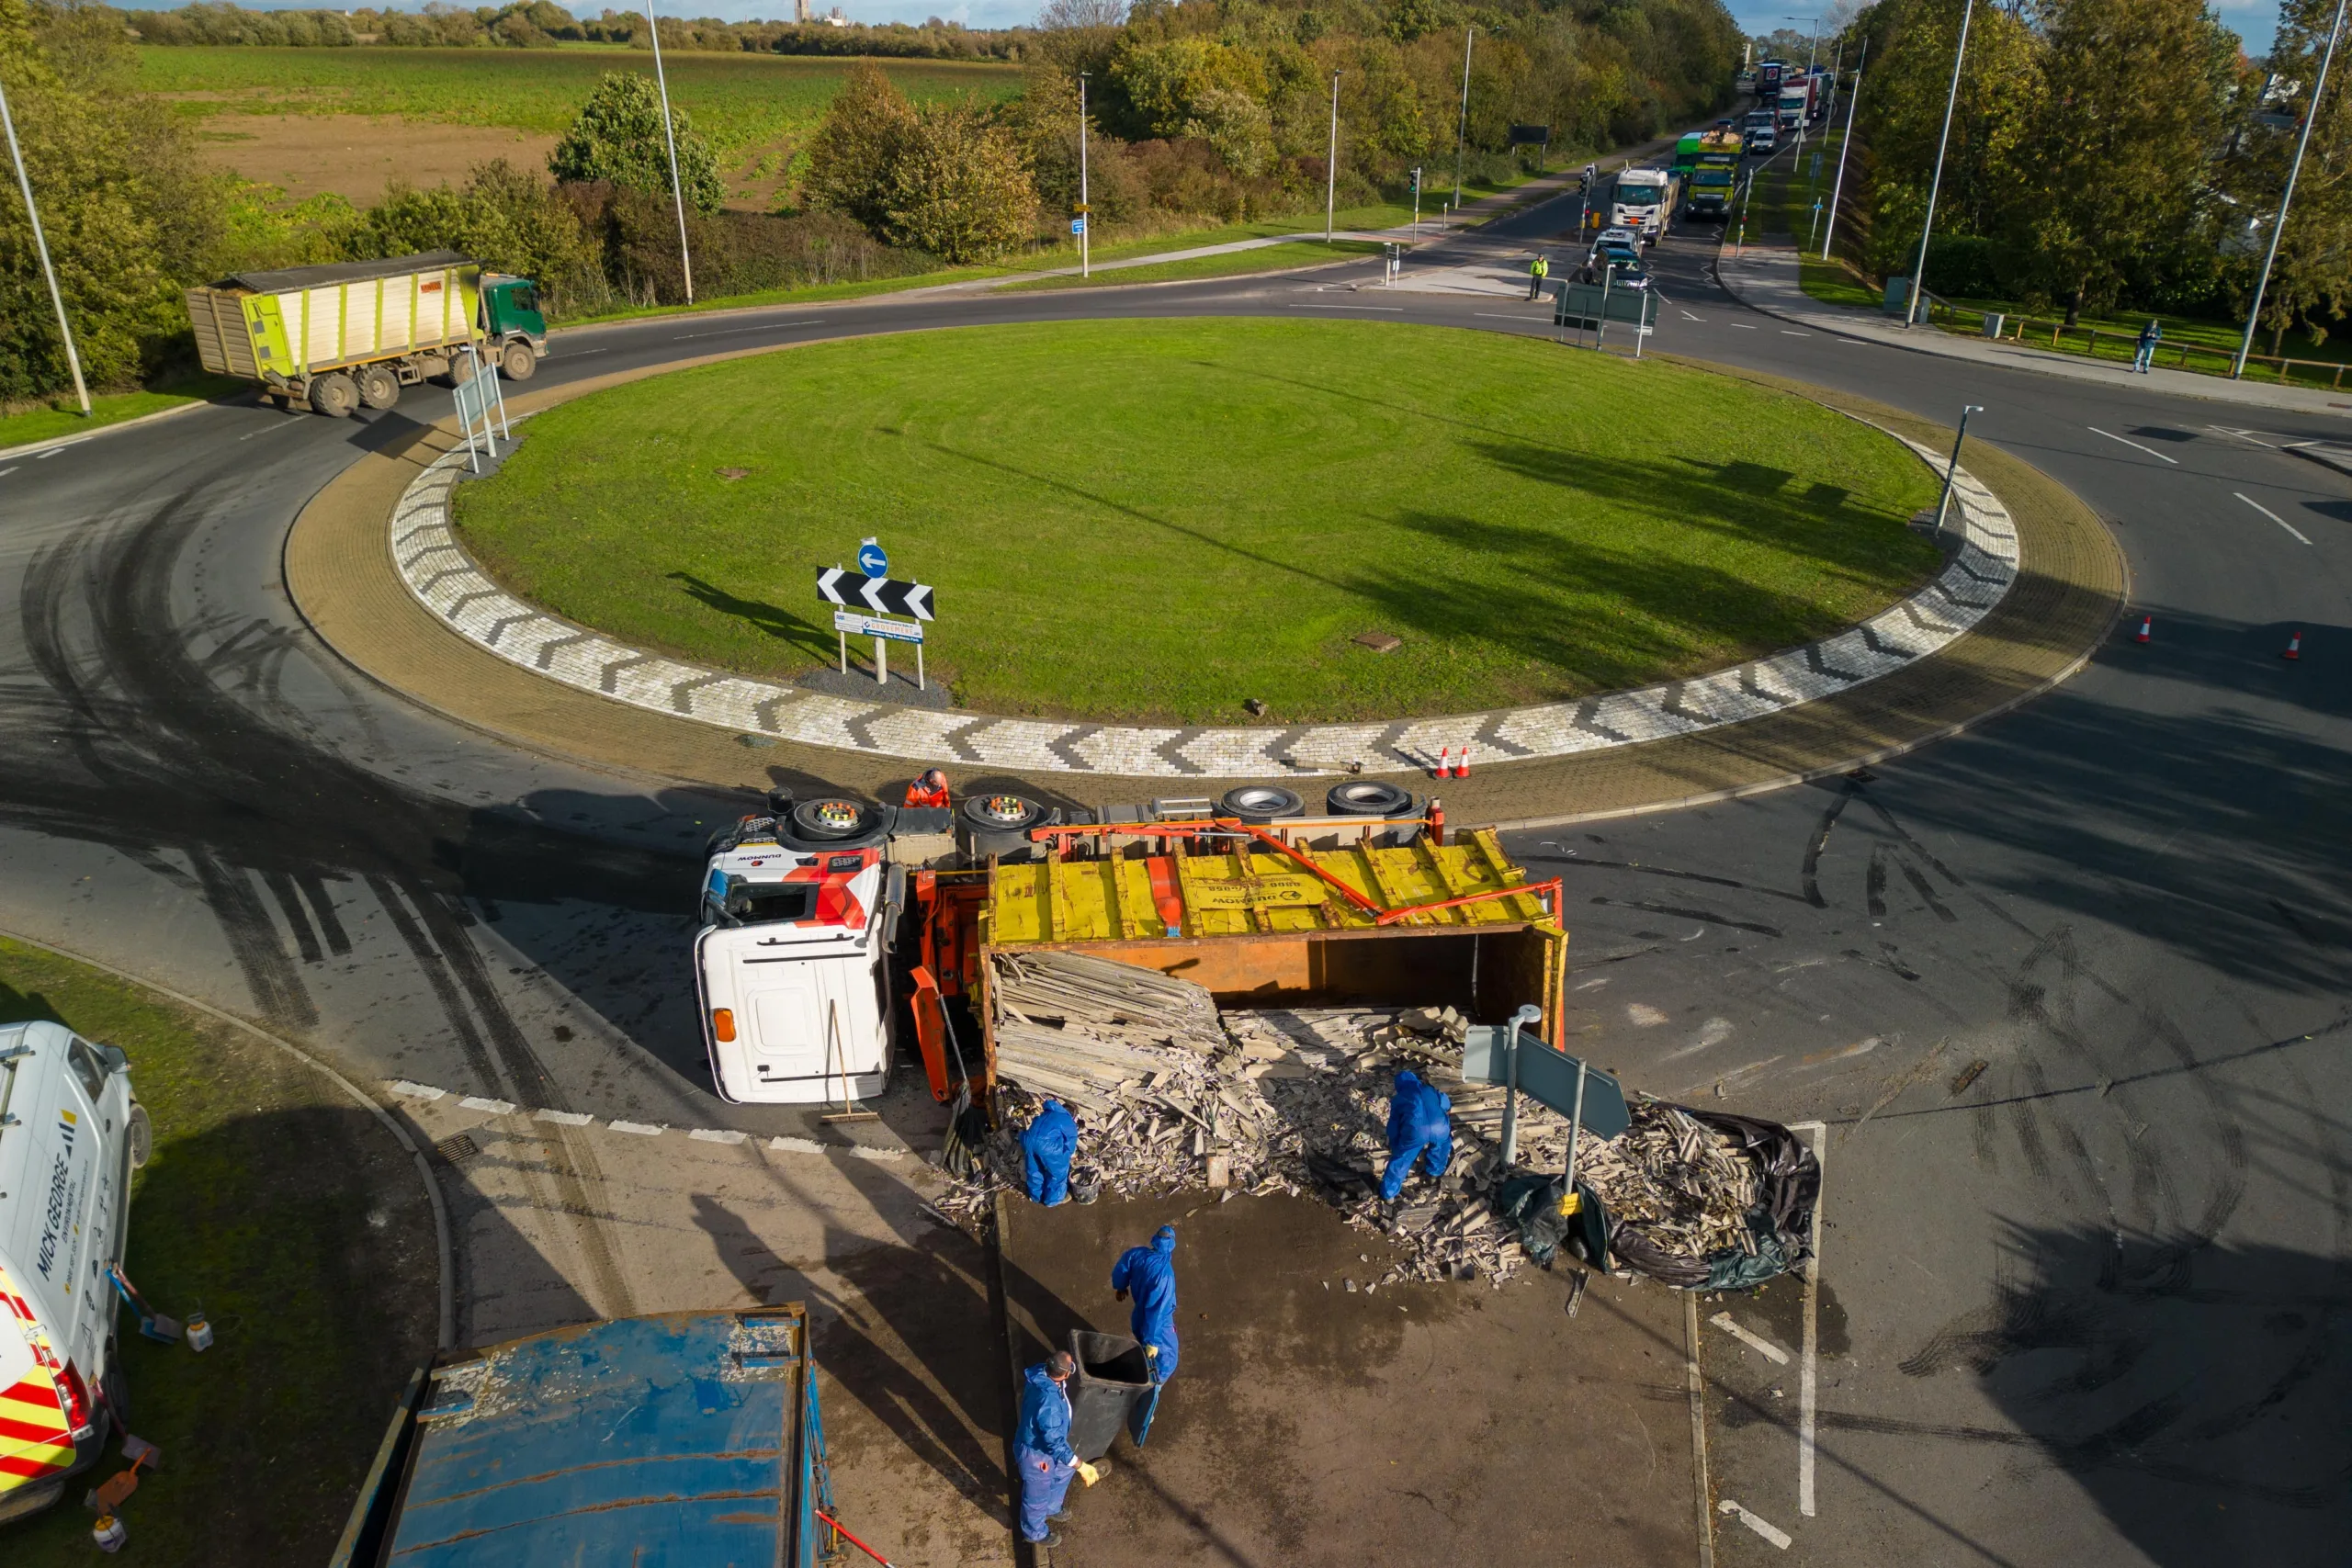 The scene at Witchford roundabout today as recovery takes place of the contents of a lorry that shed its load. PHOTO: Terry Harris for CambsNews